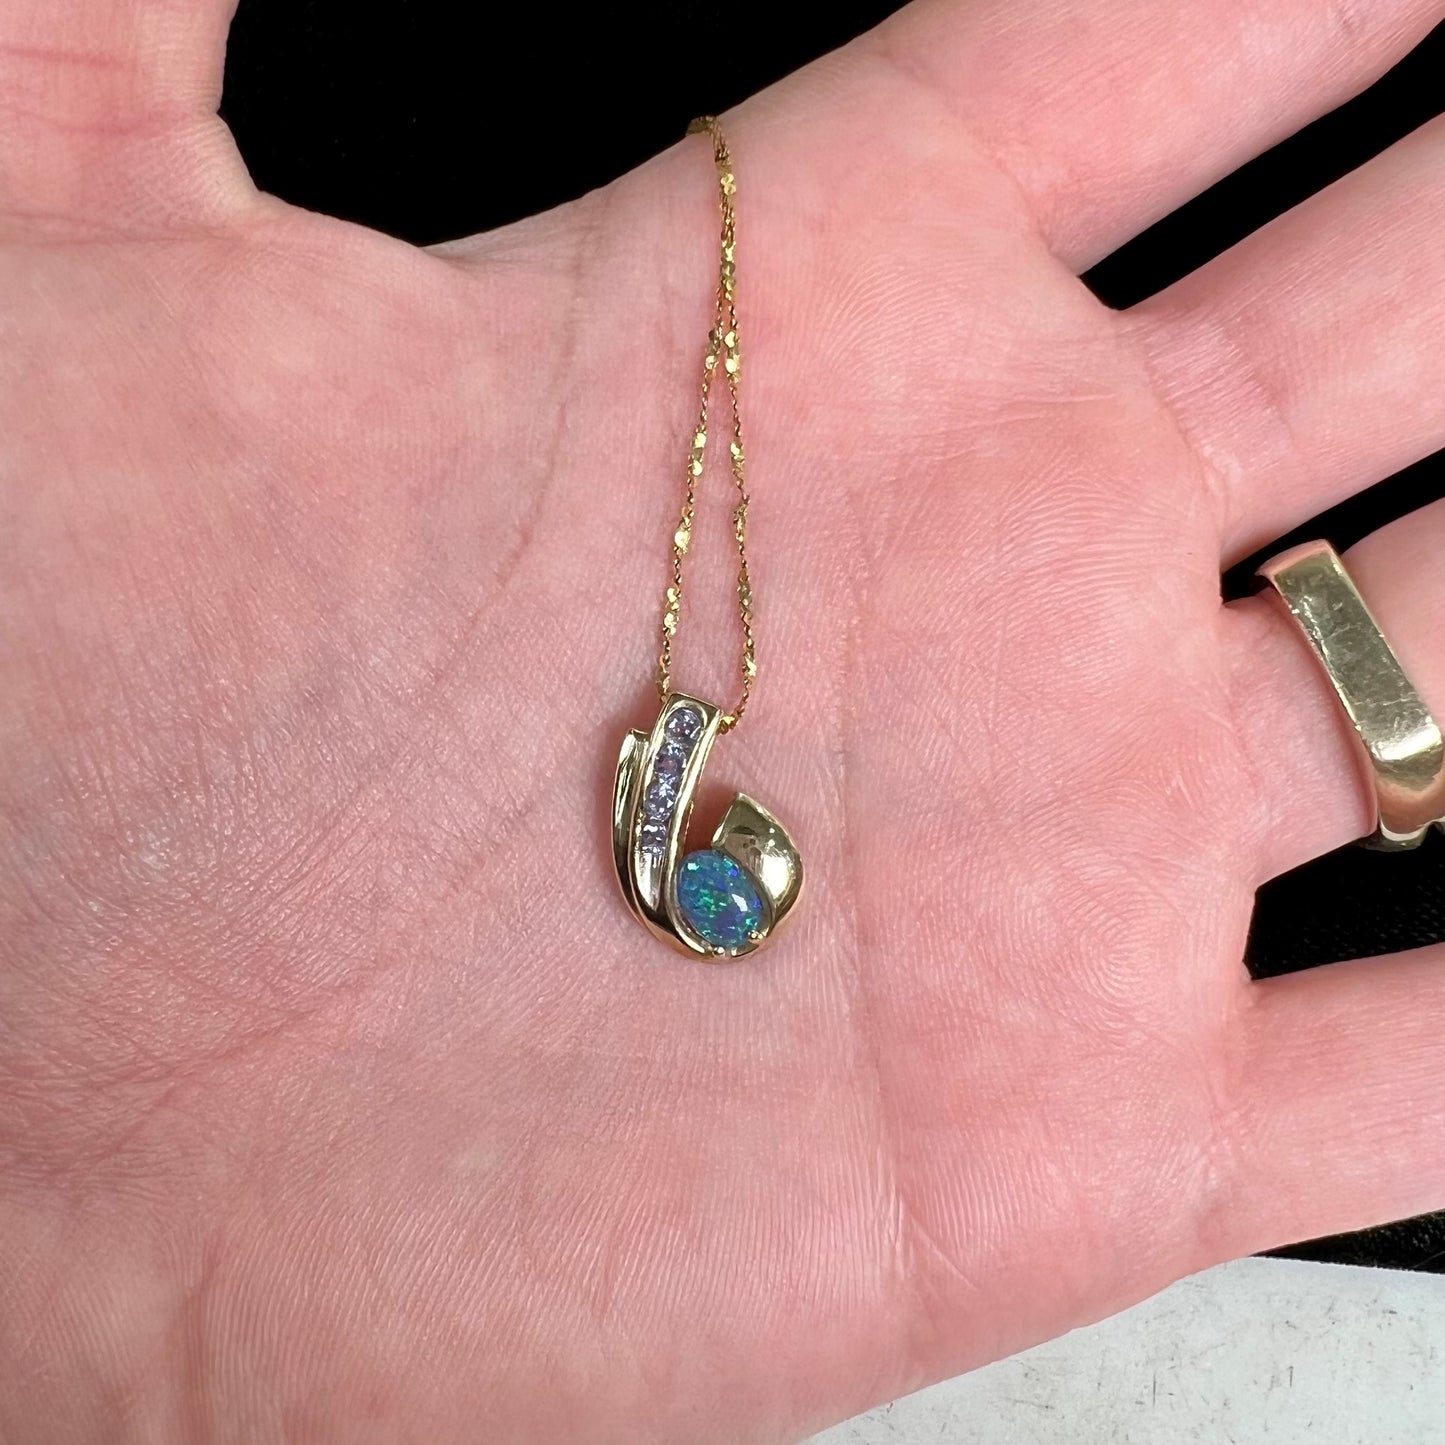 A Lightning Ridge black crystal opal necklace set with blue tanzanite in yellow gold.  Gold chain not included.